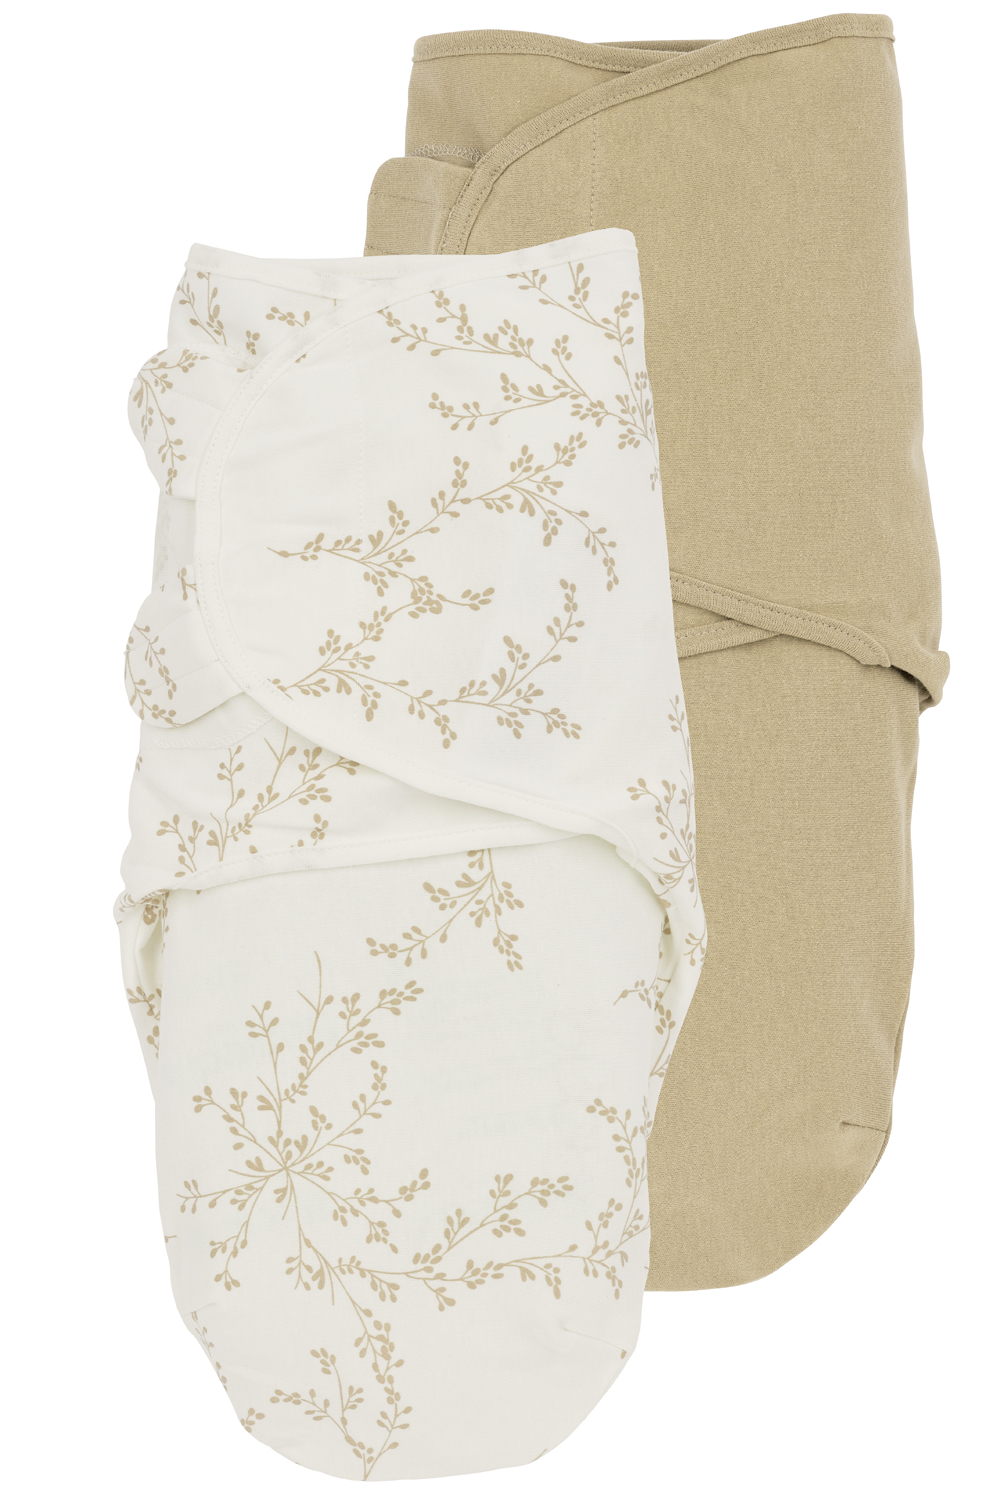 Swaddle 2-pack Branches/Uni - sand - 4-6 Months